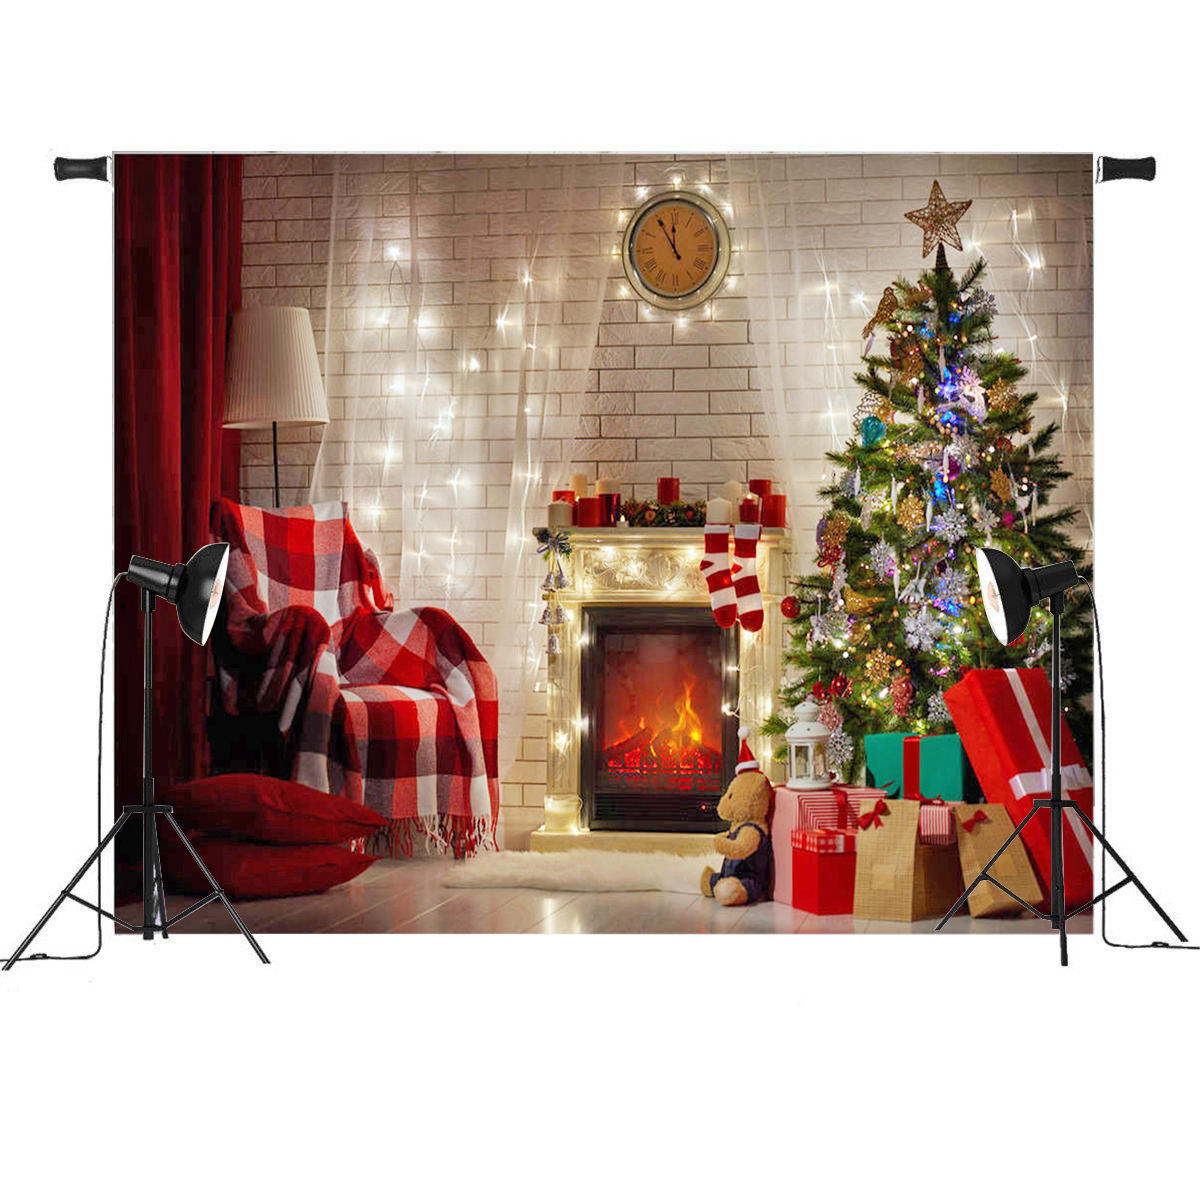 Lighting Above Fireplace Lovely 7x5ft Red Christmas Tree Gift Chair Fireplace Graphy Backdrop Studio Prop Background